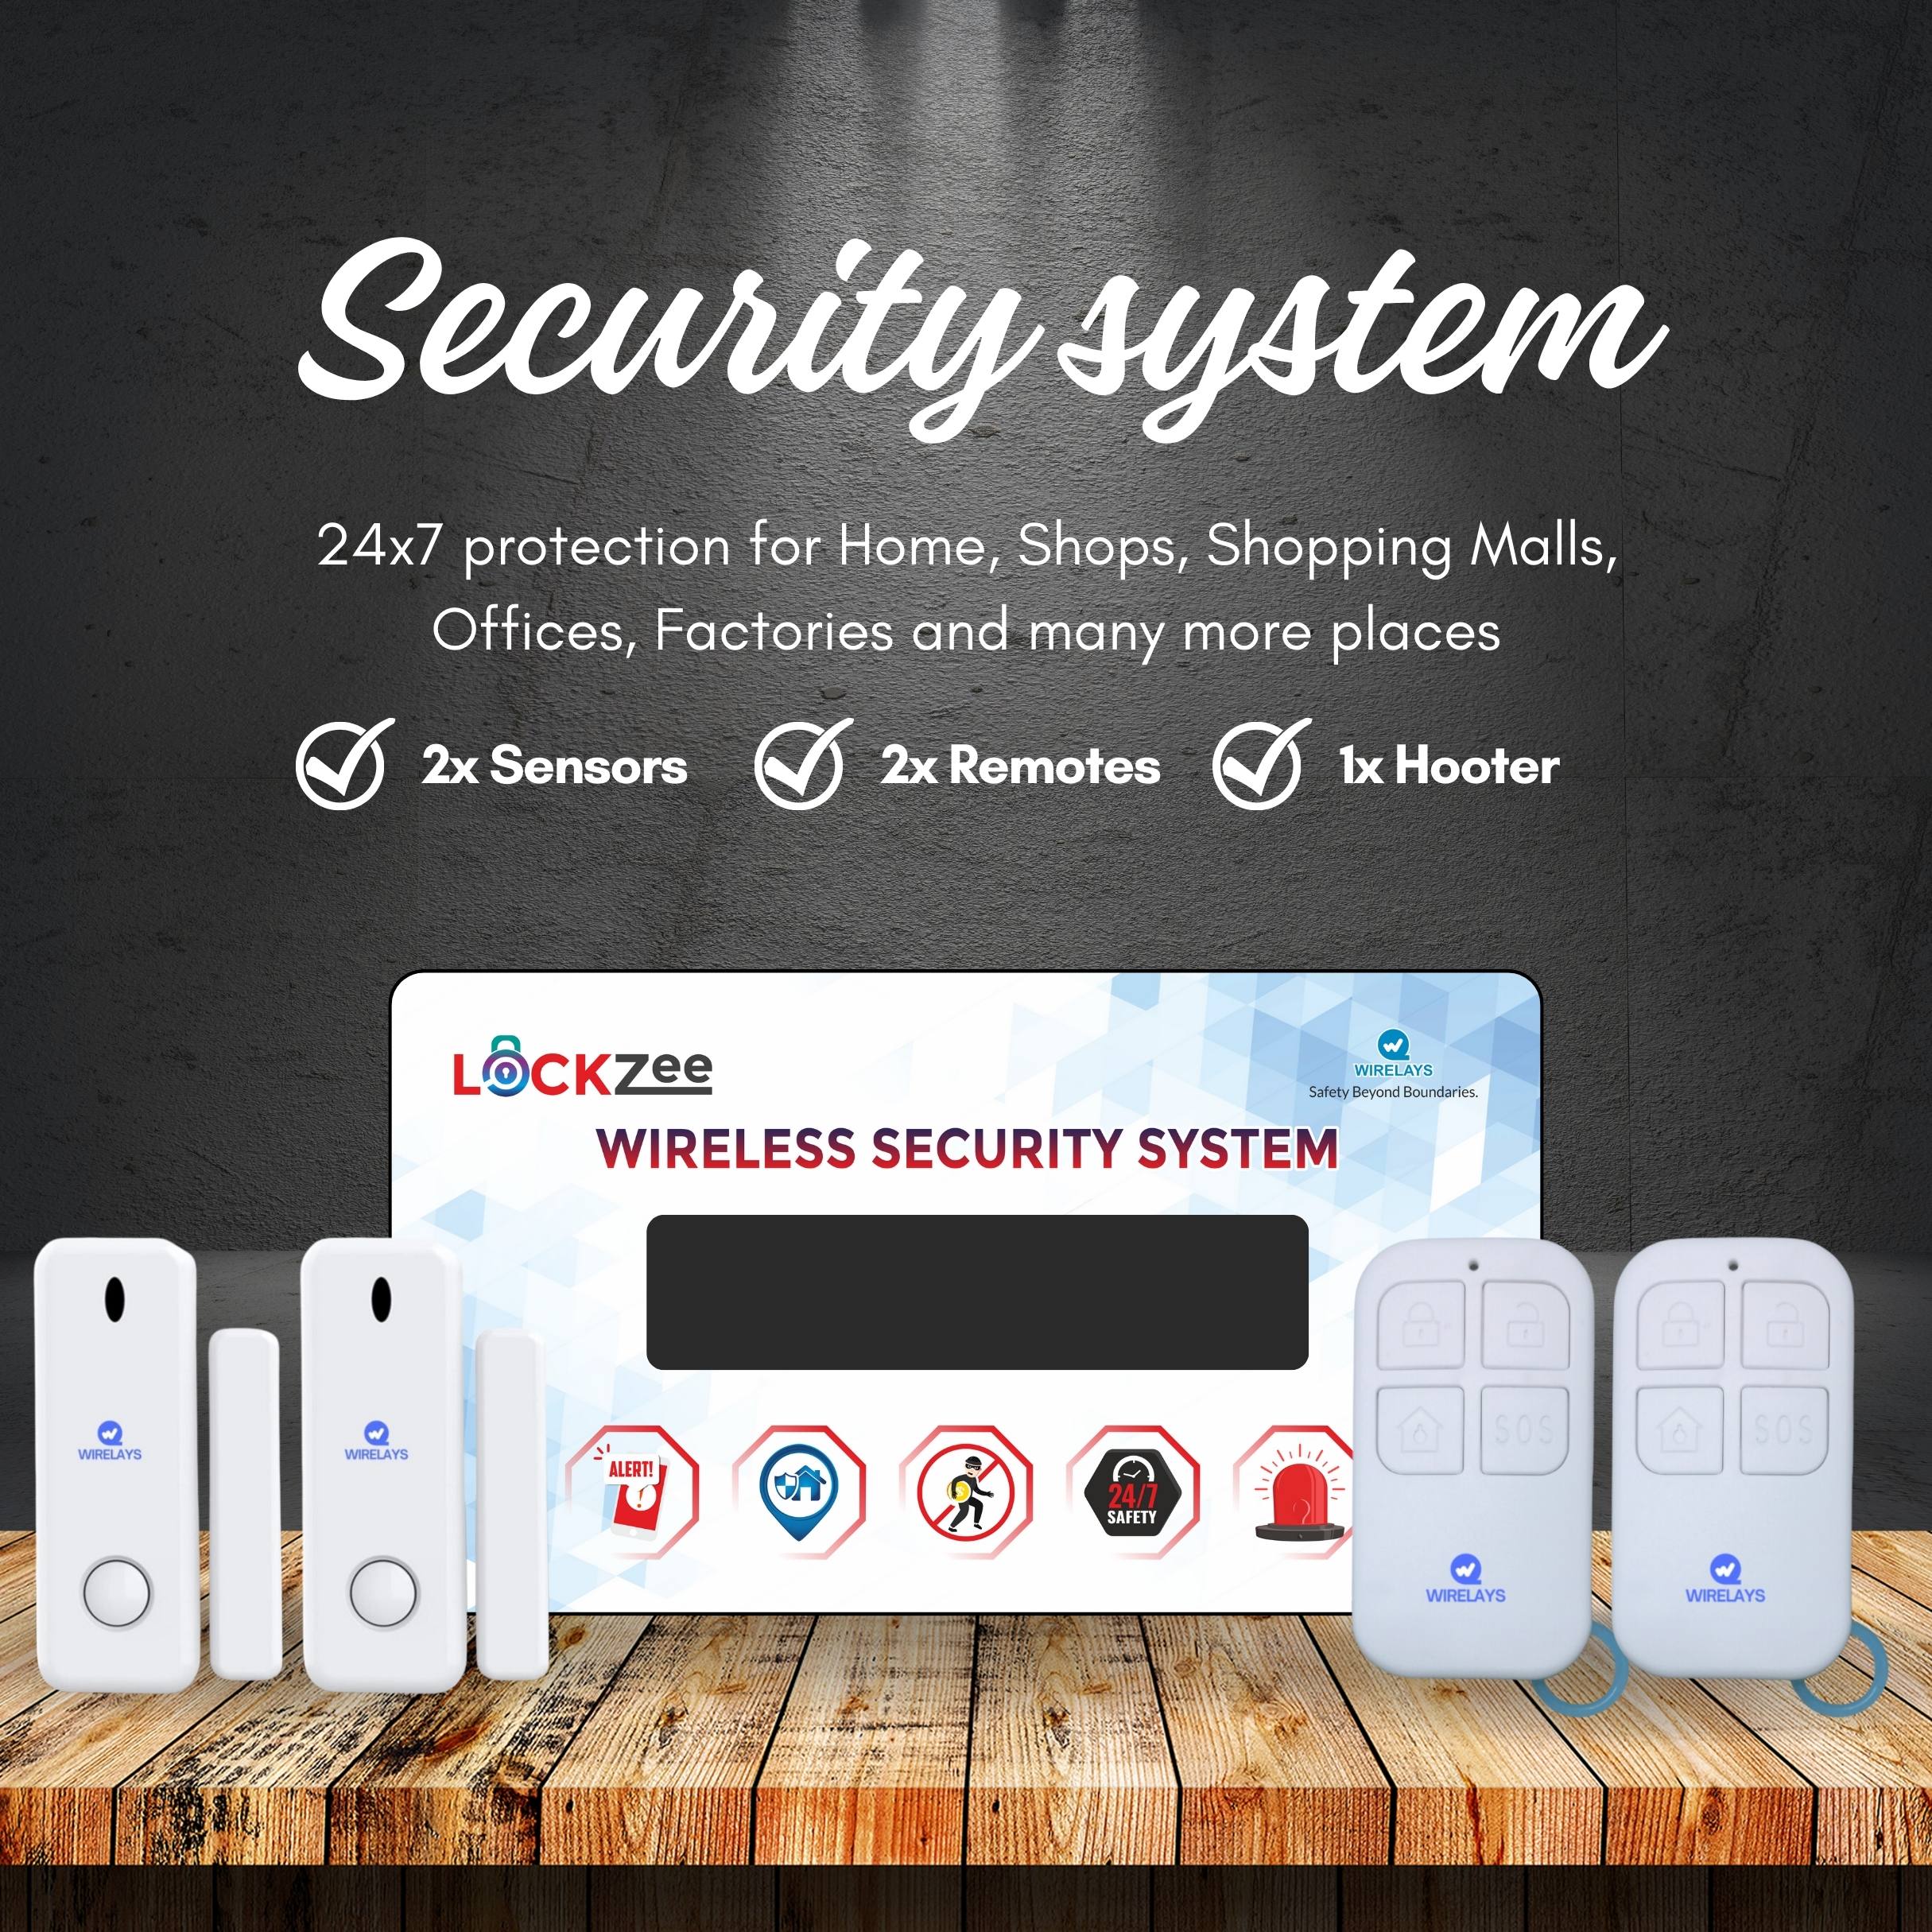 Wirelays Wireless Smart Home Security System | Door Security Sensor | WiFi and GSM Dual Protection Intruder Alarm System |Model Wirelays-003 (White ABS Plastic)